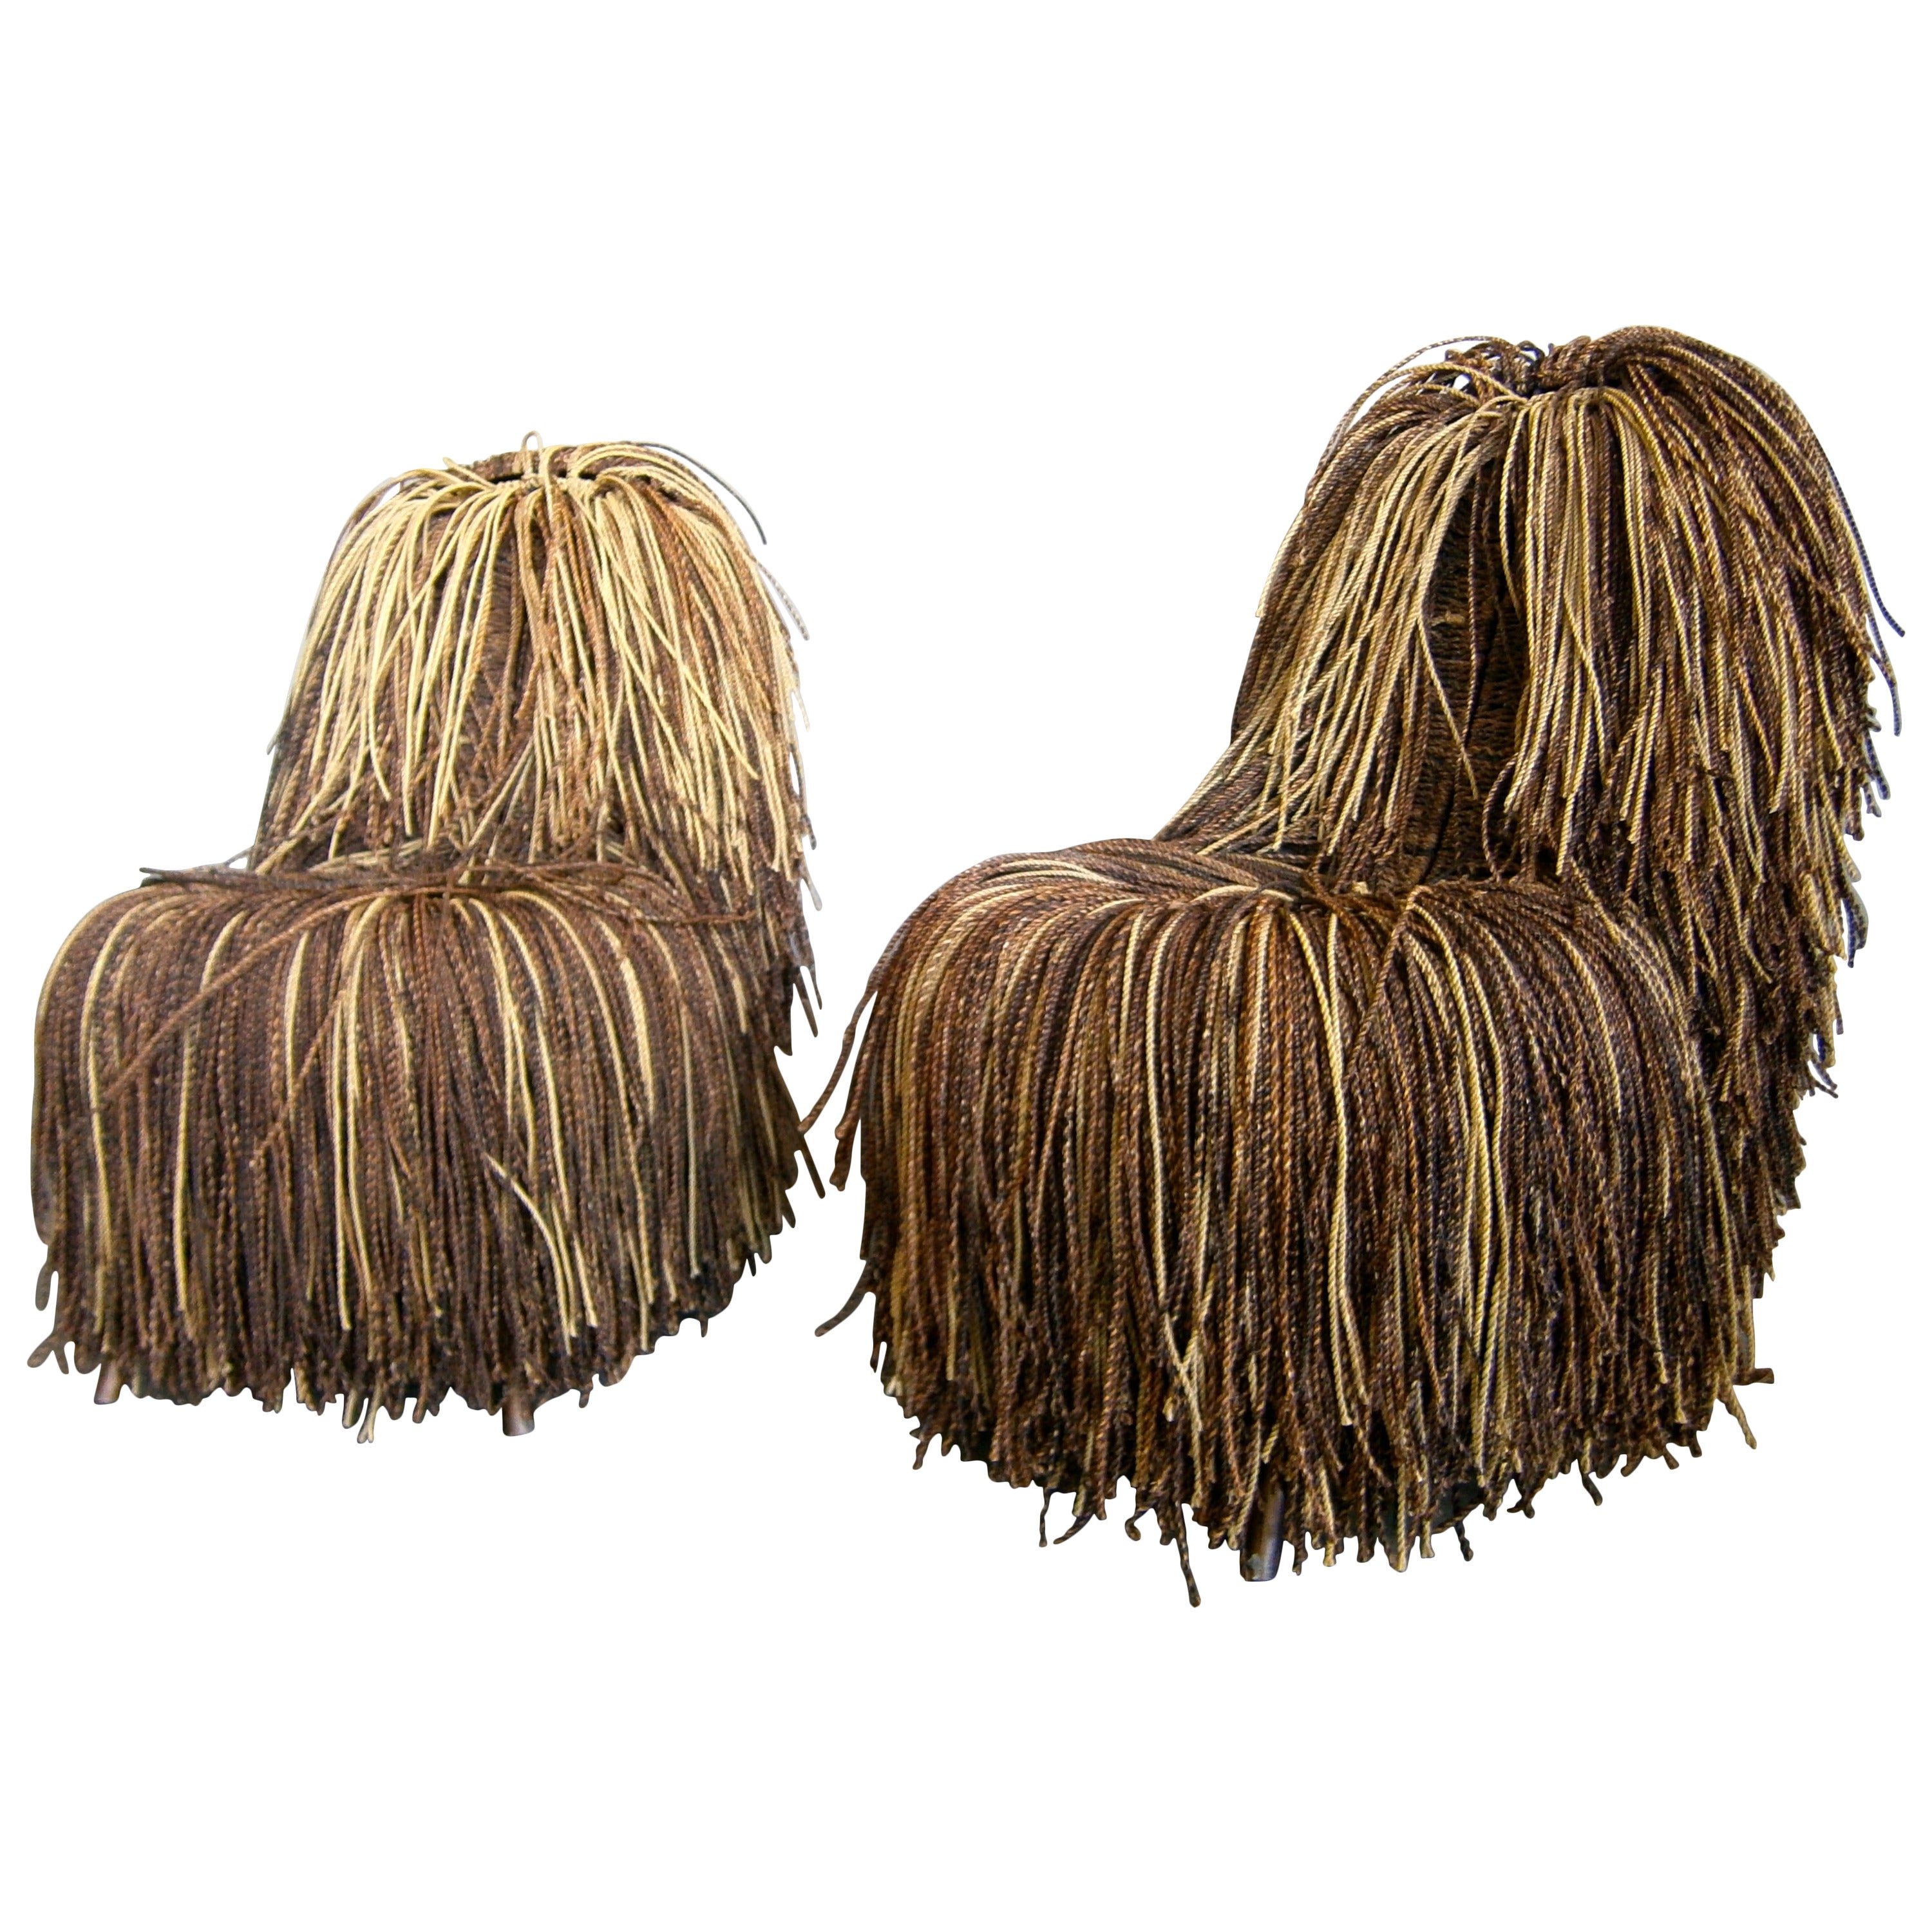 Jocular Pair of Shaggy Cord Chairs in the Style of the Campana Brothers.